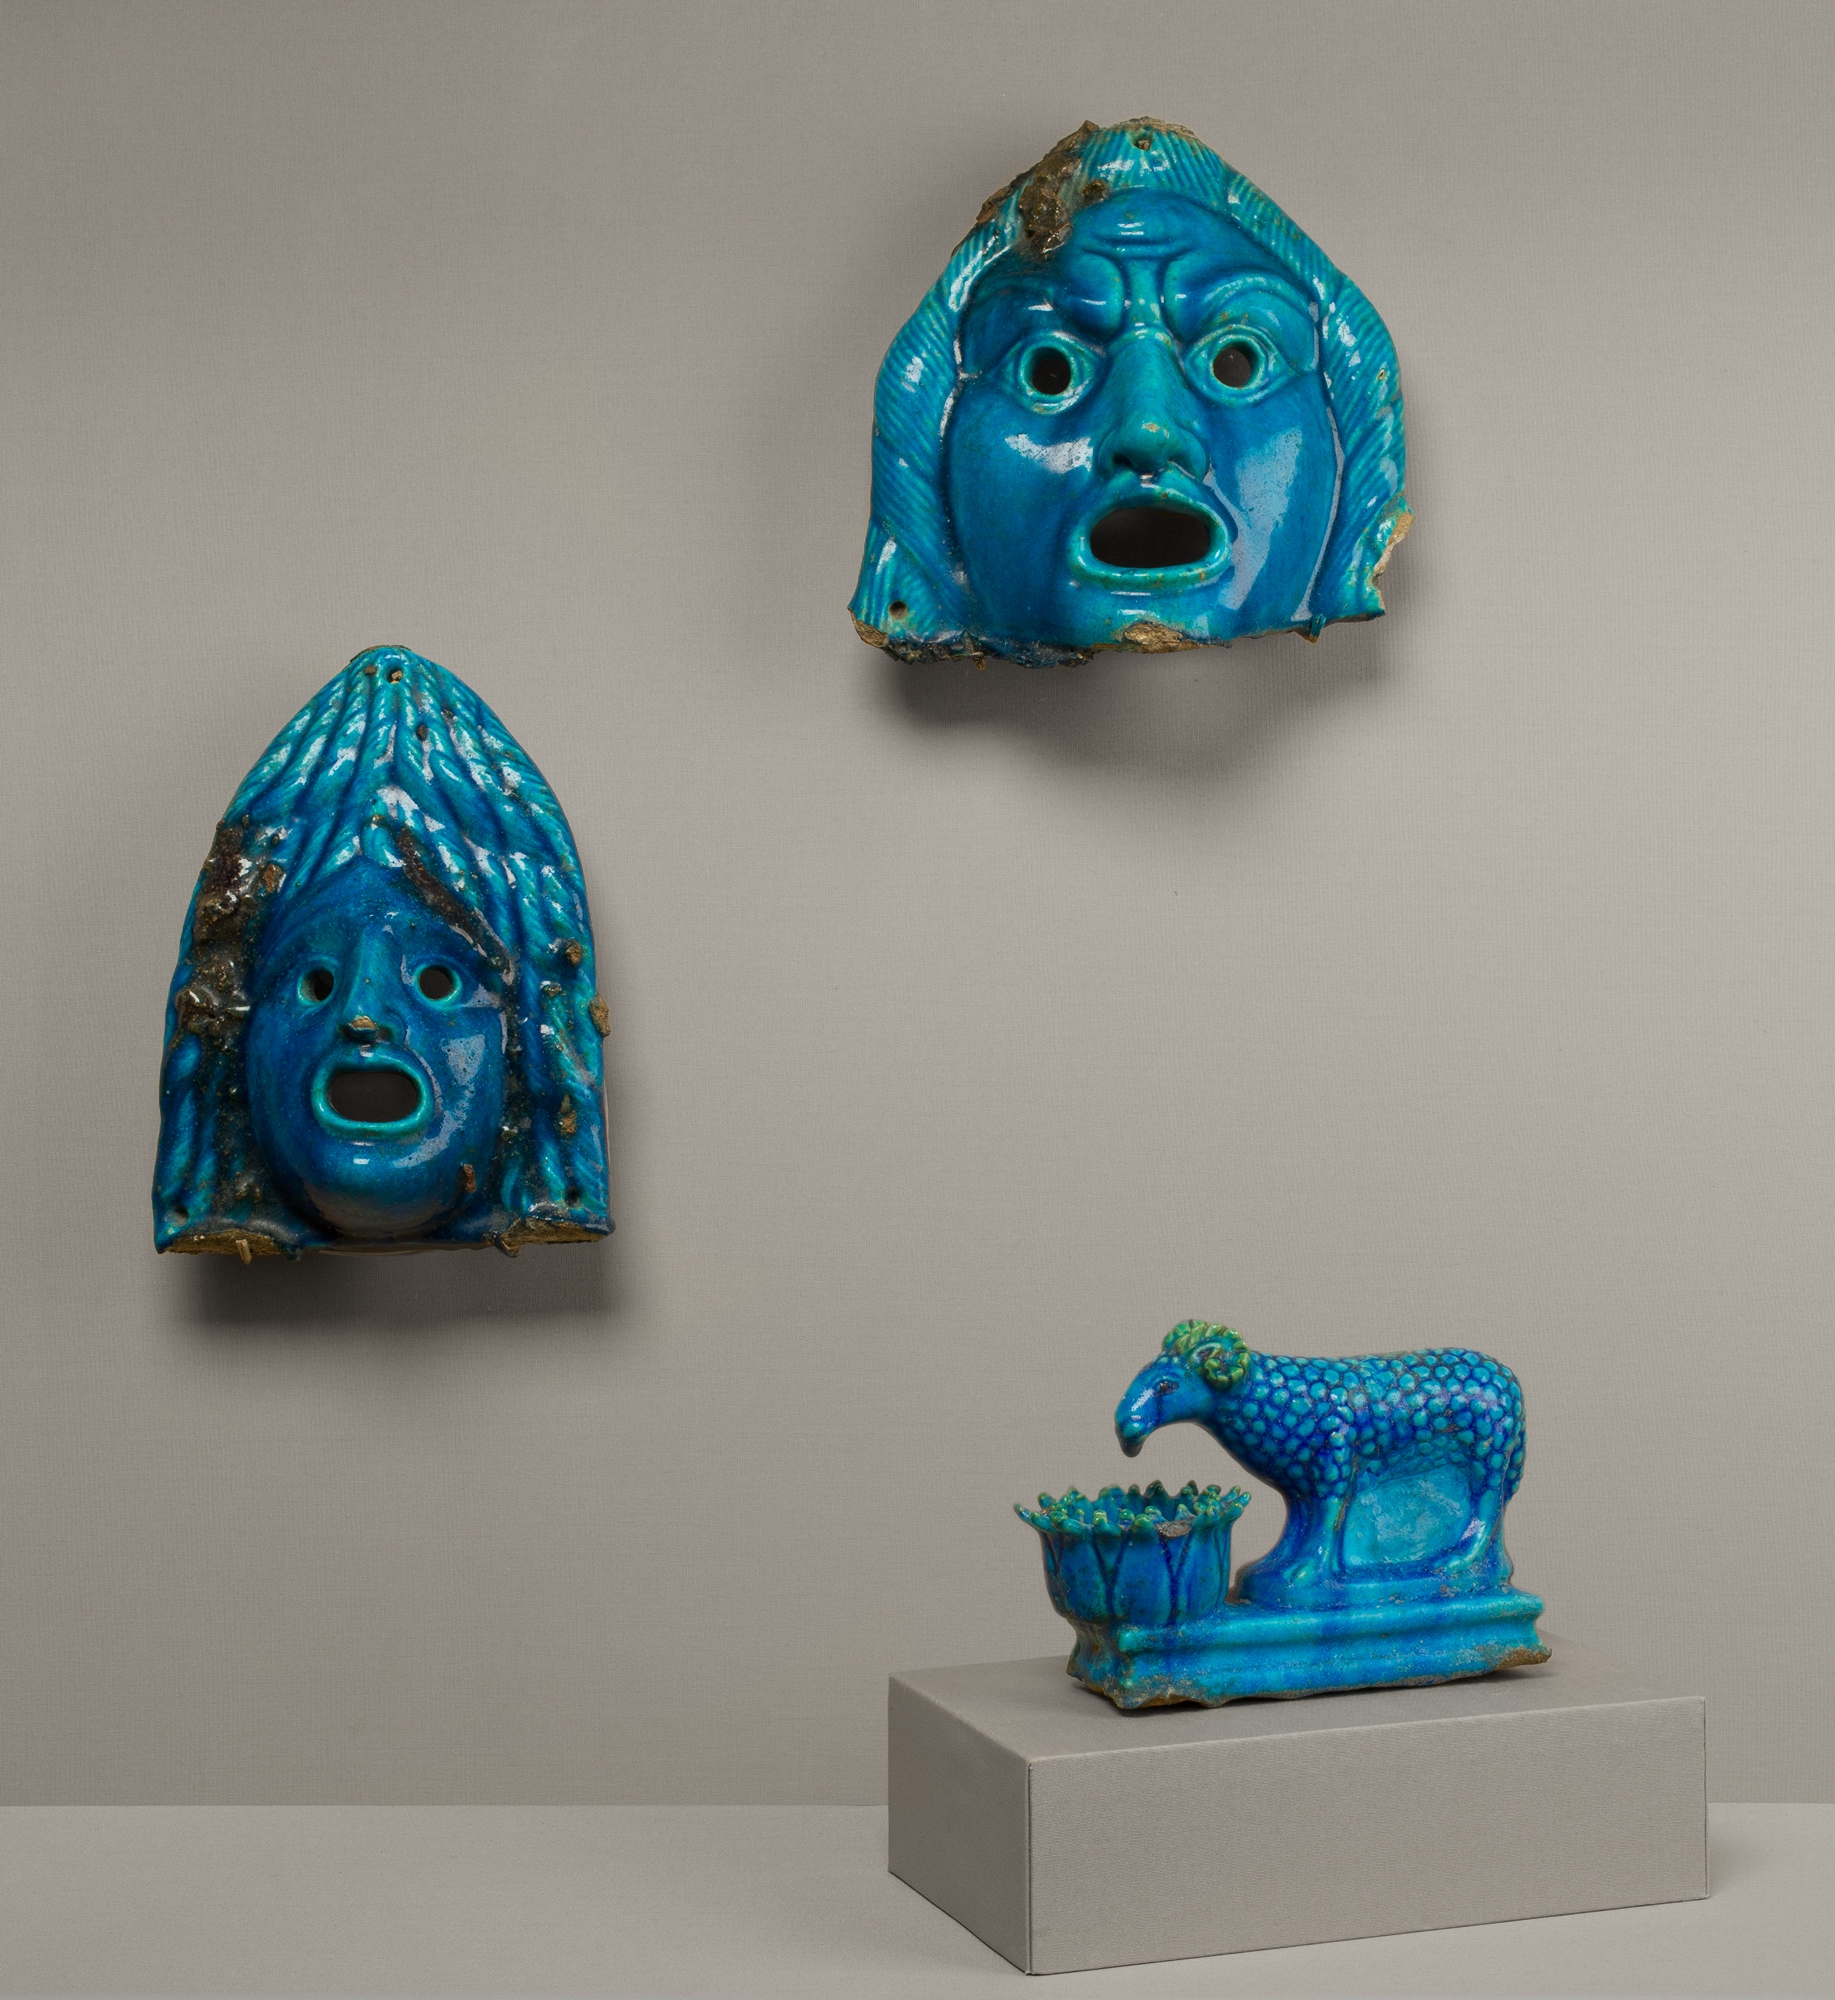 Theatrical Masks and Ram Vessel for Offering, Roman Period